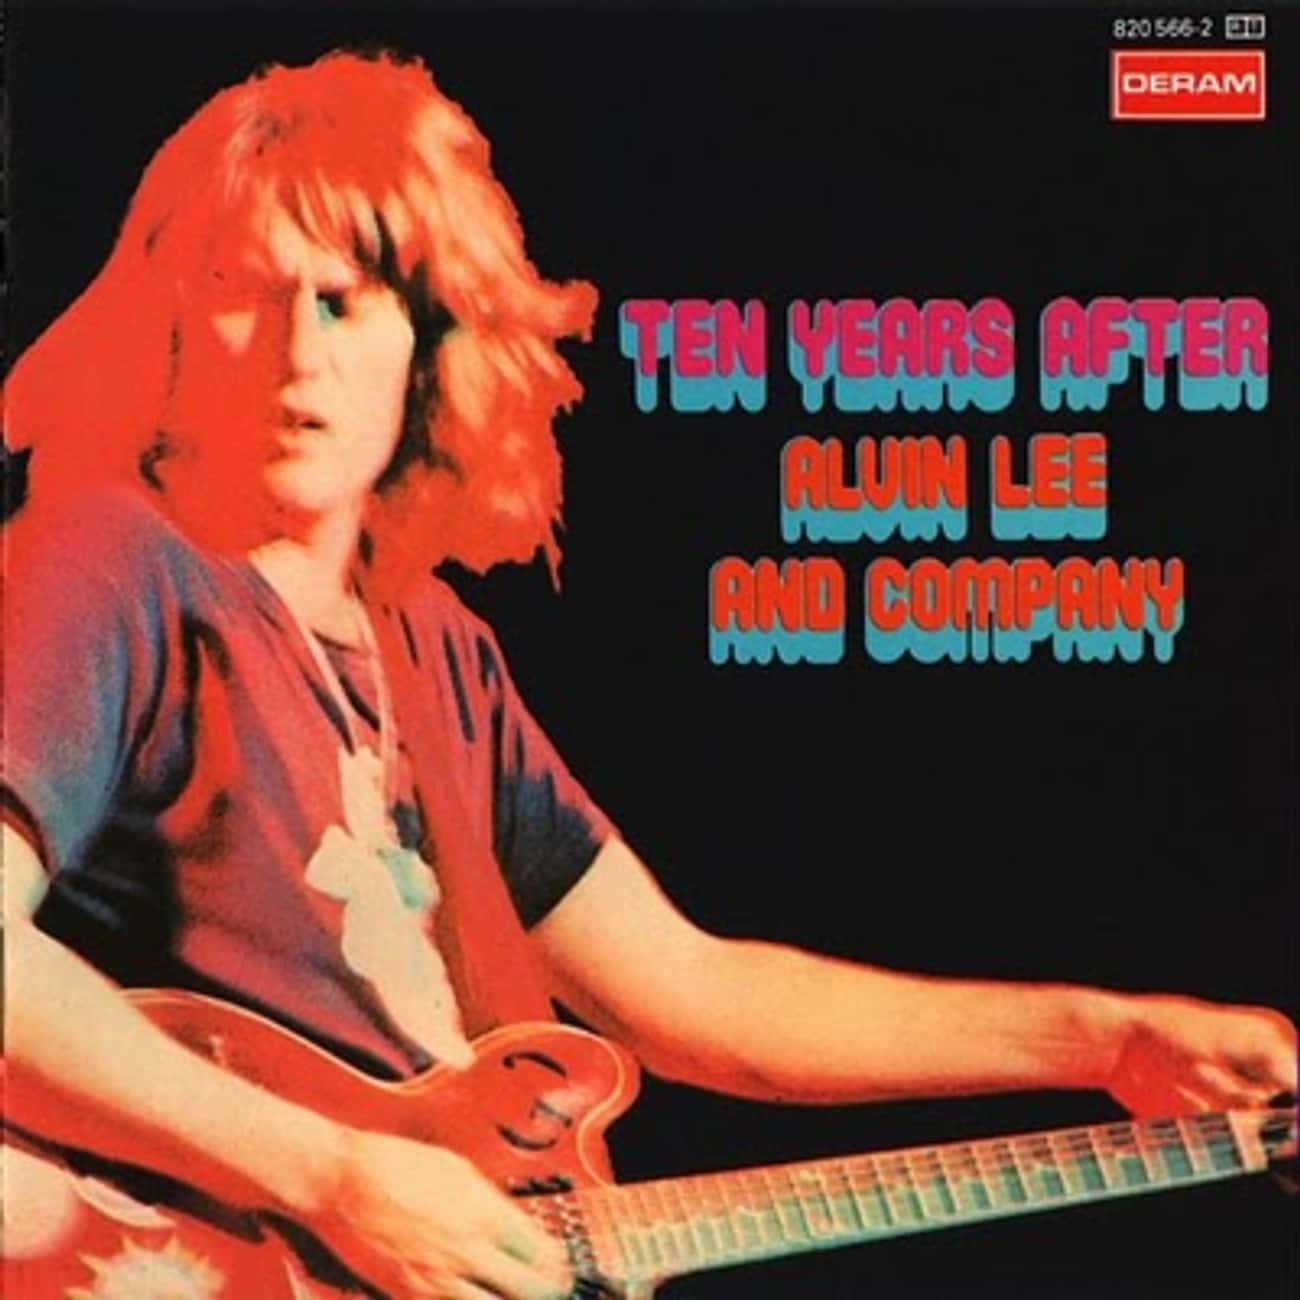 Alvin Lee and Company